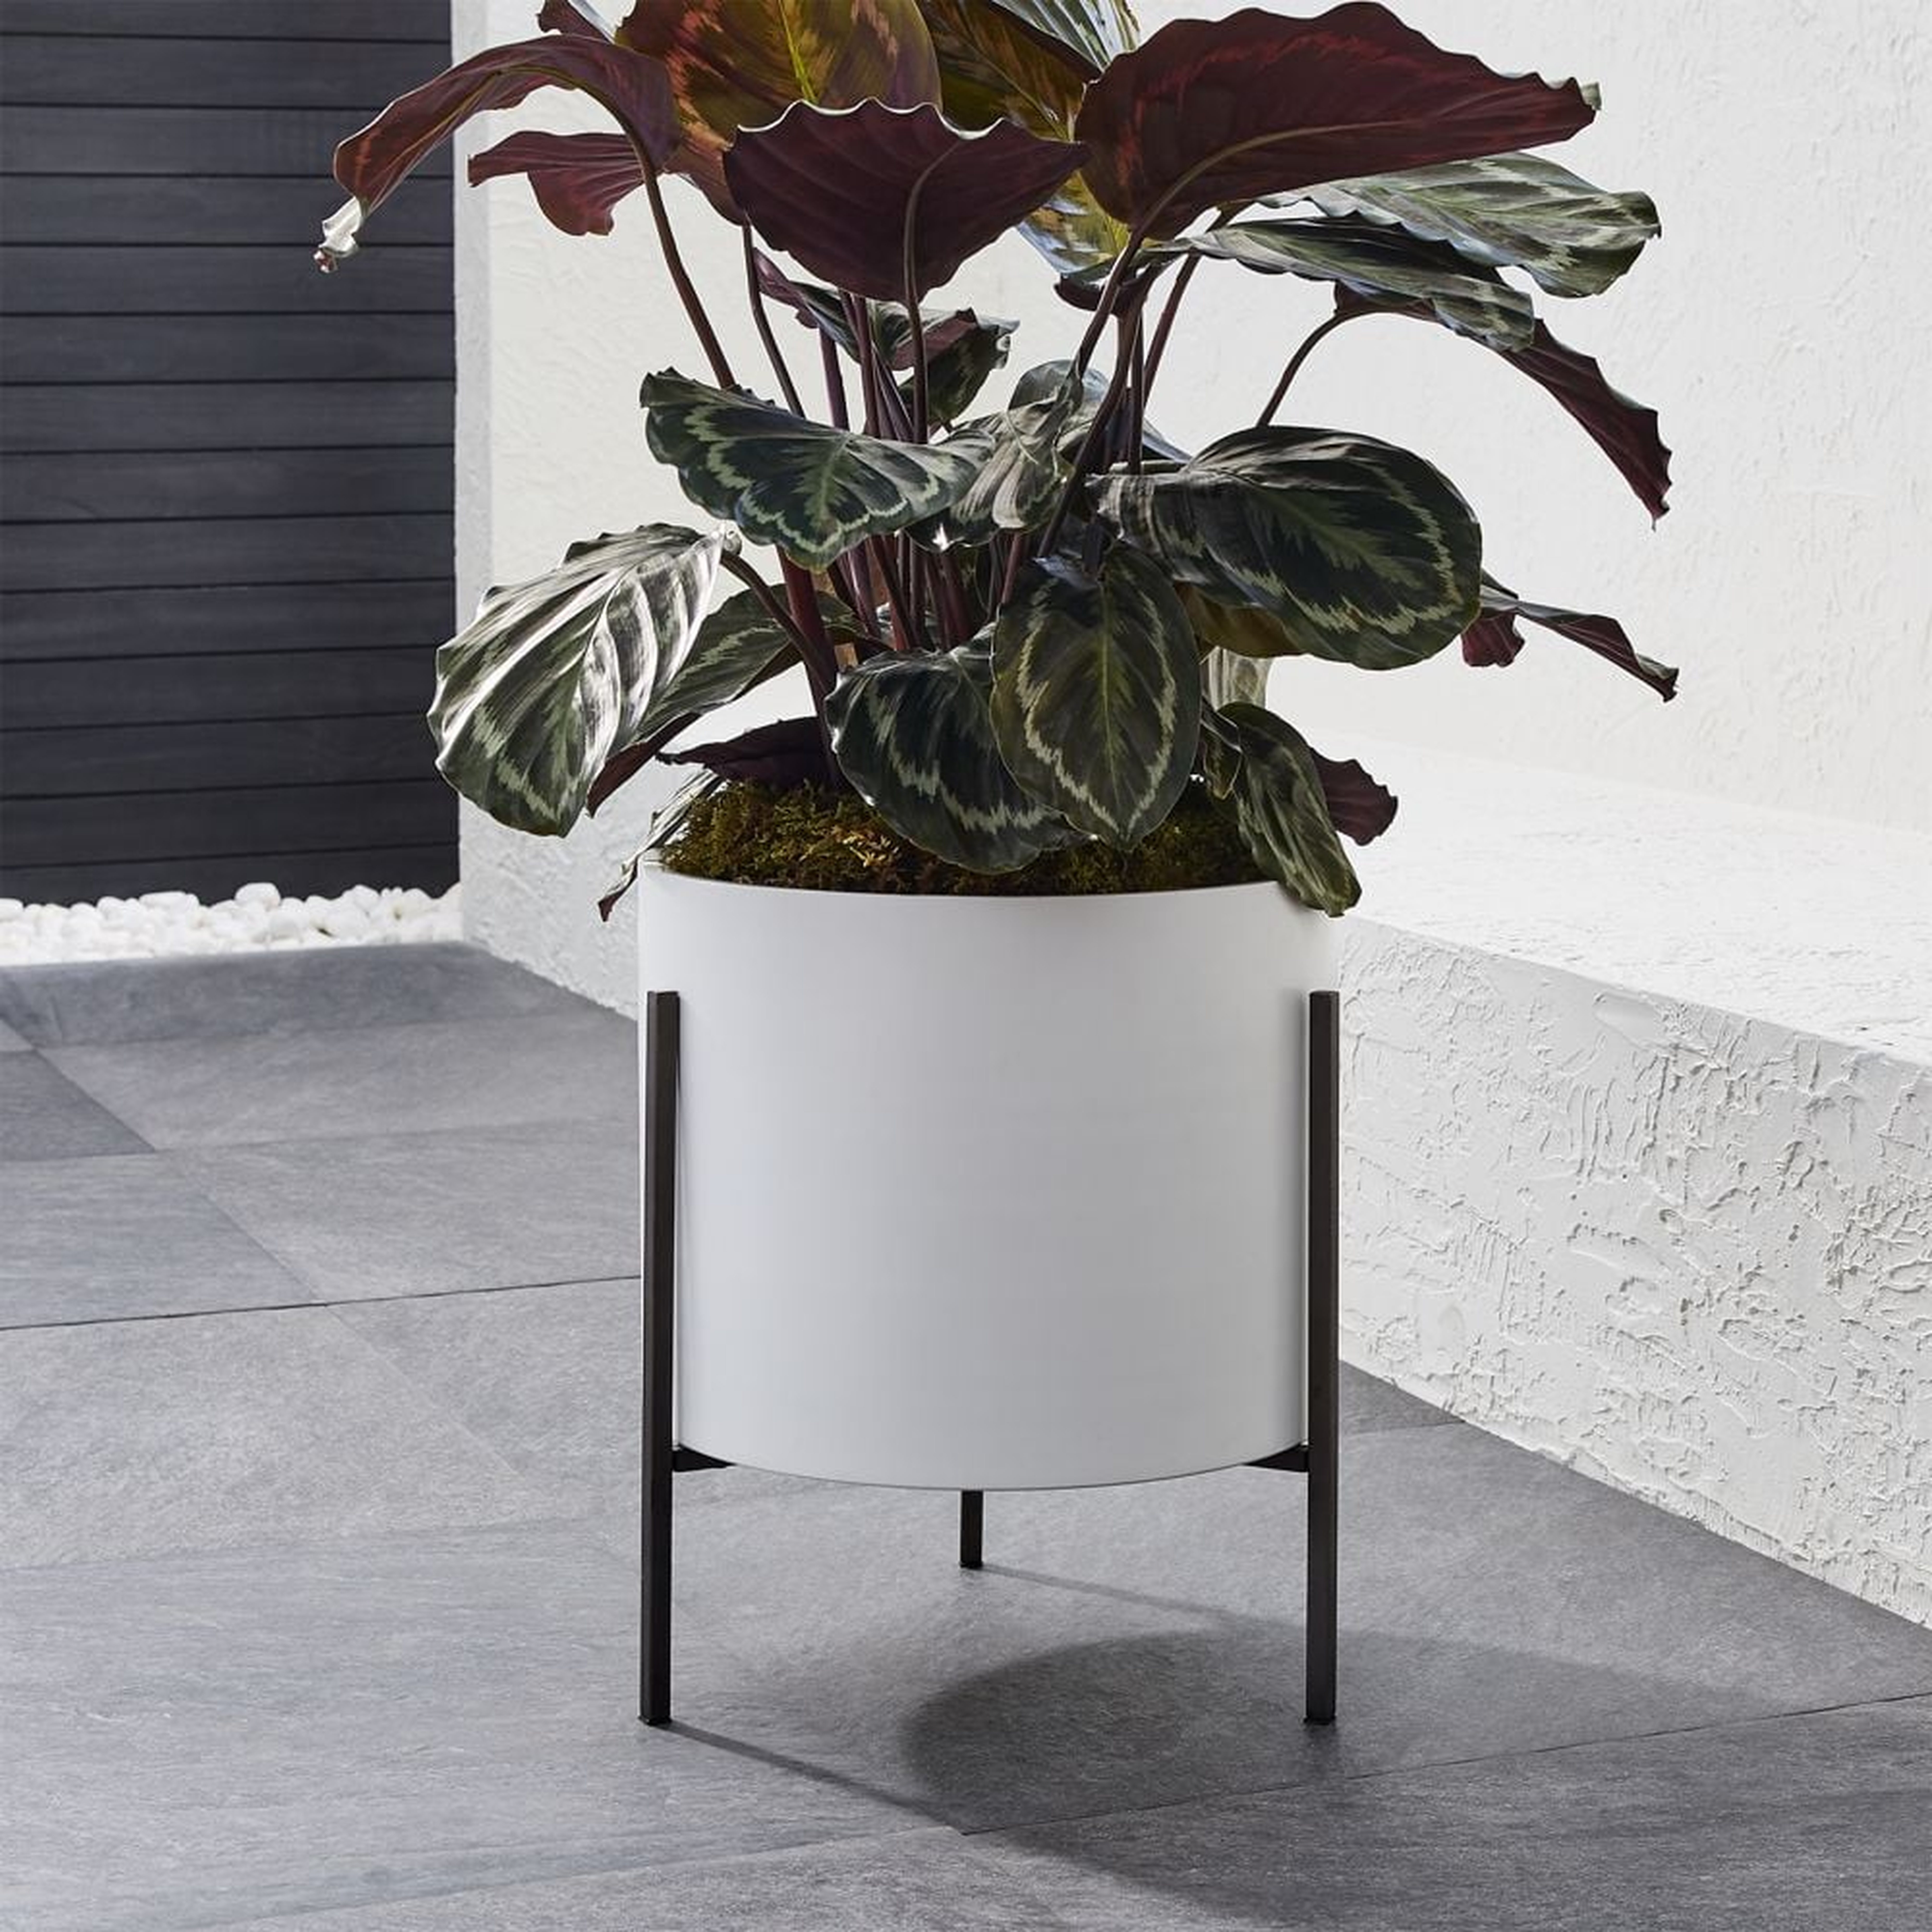 Dundee Indoor/Outdoor Low White Planter with Stand - Crate and Barrel